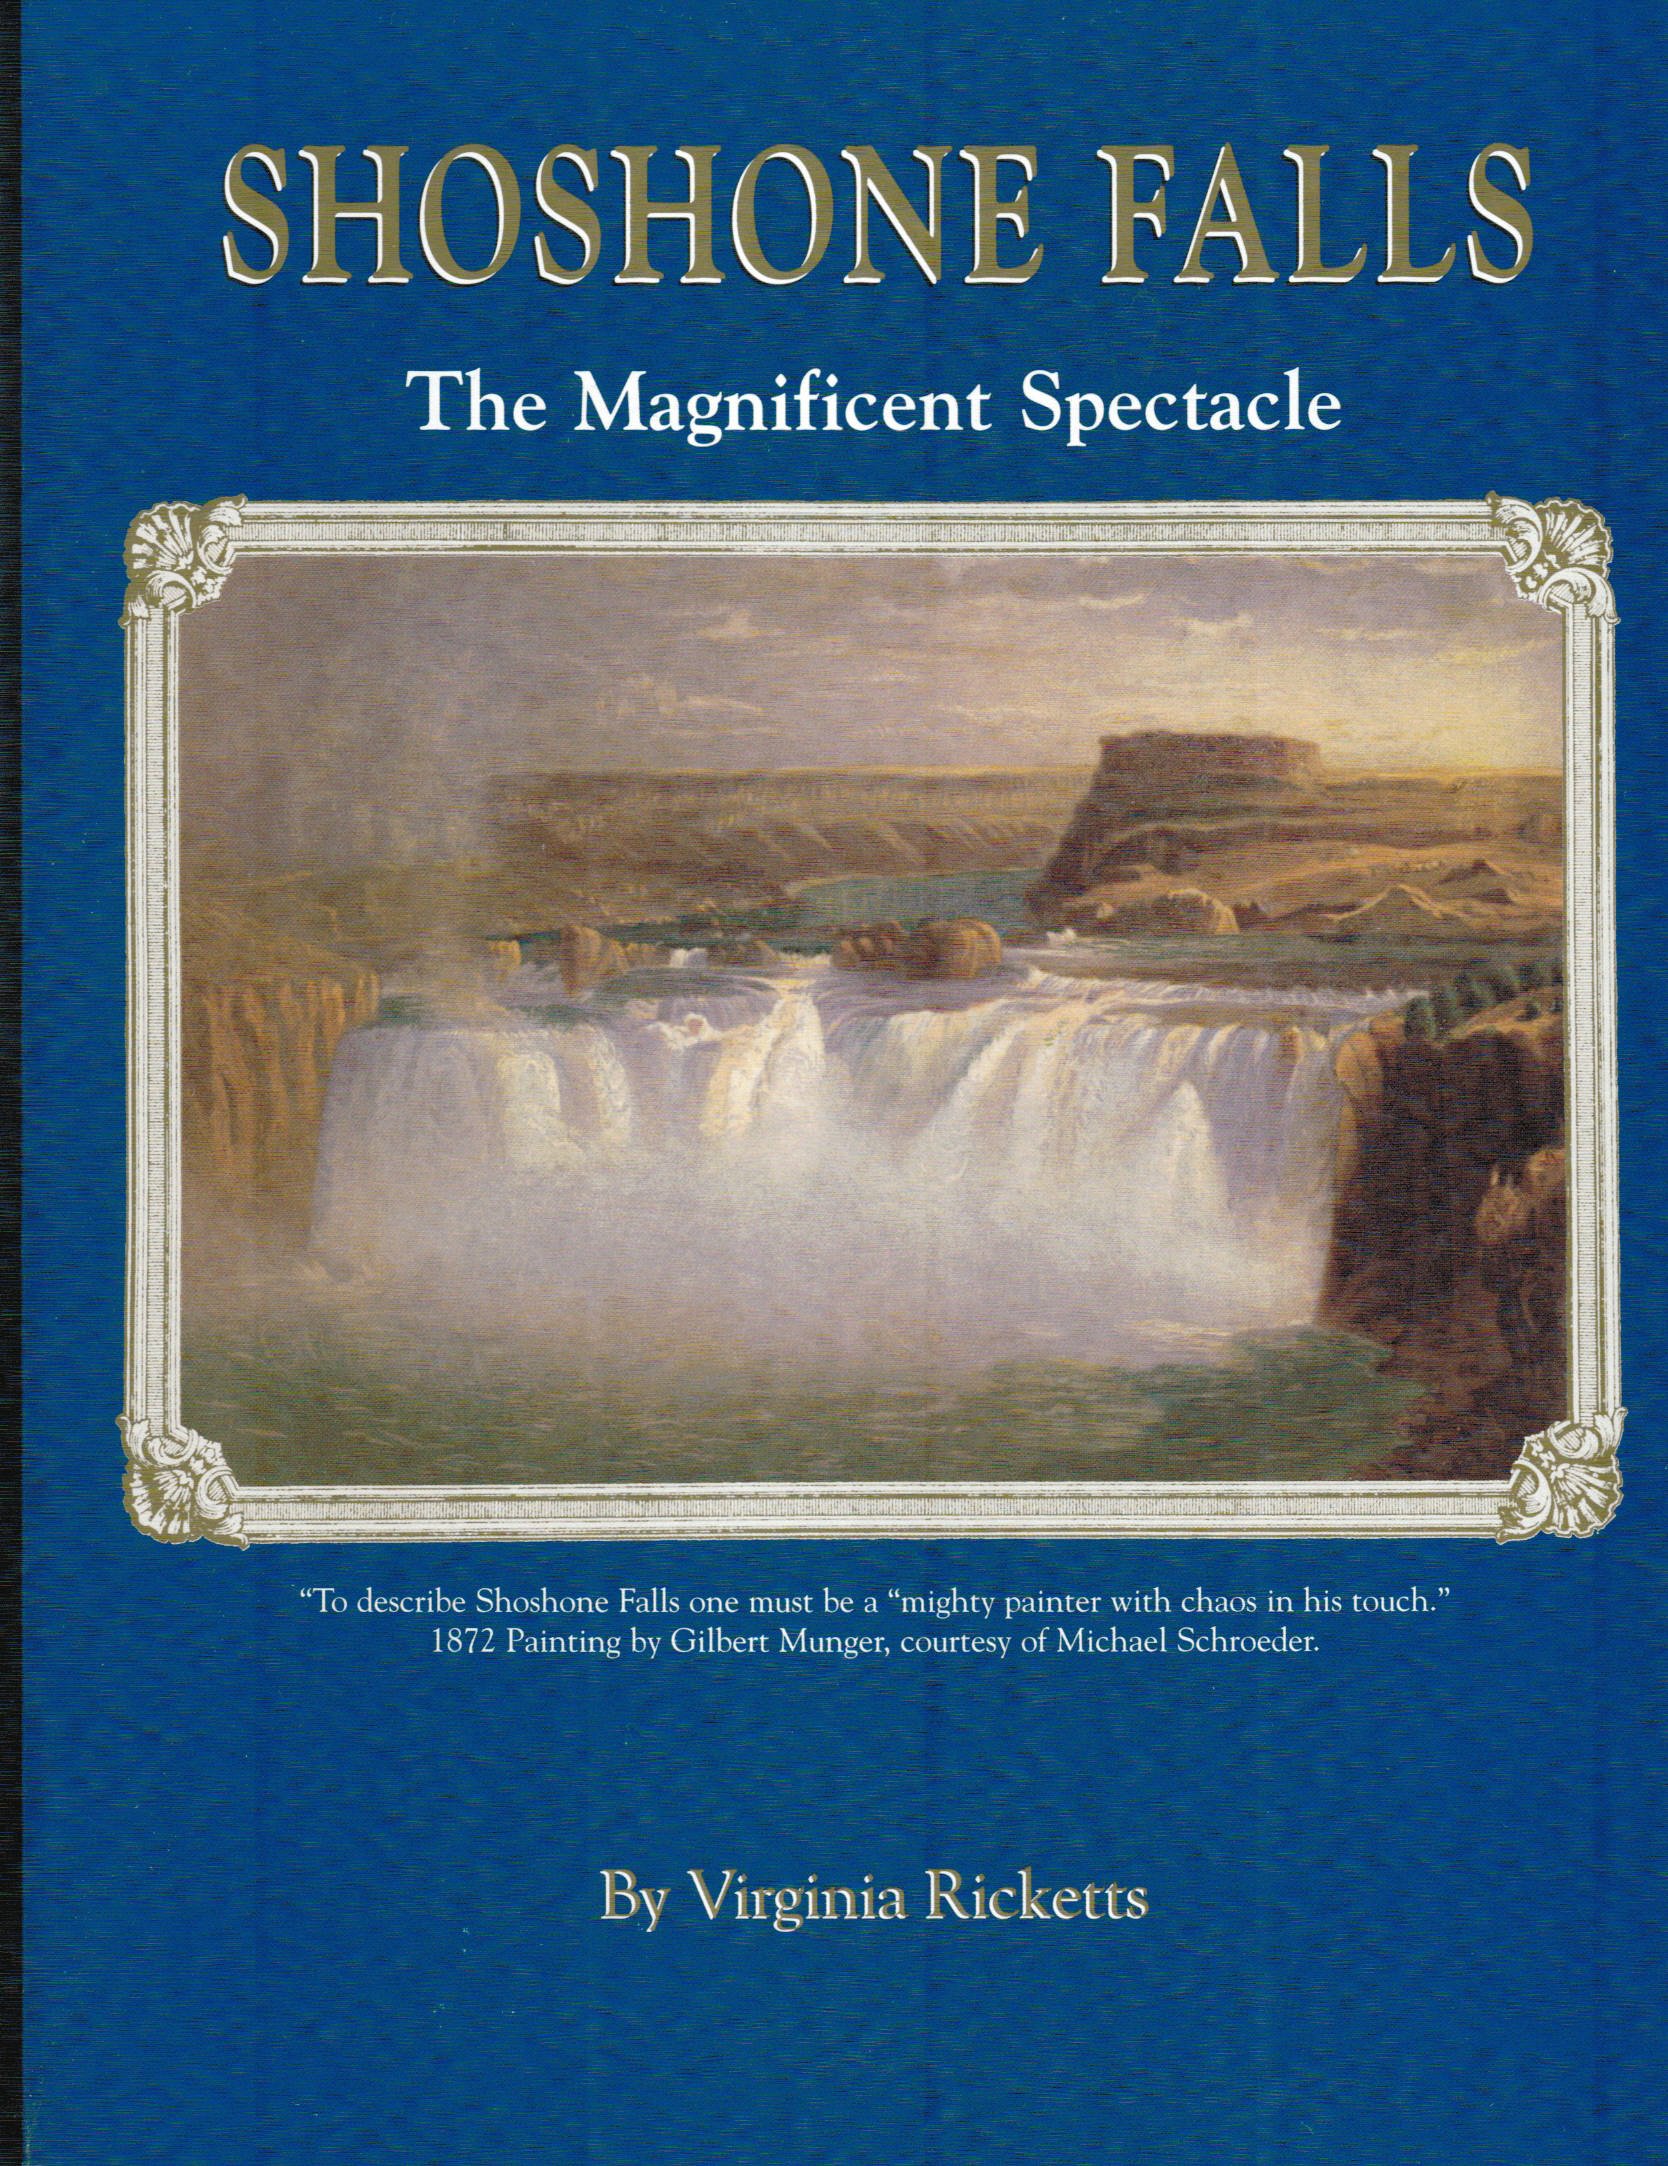 Shoshone Falls: The magnificent spectacle (book cover)